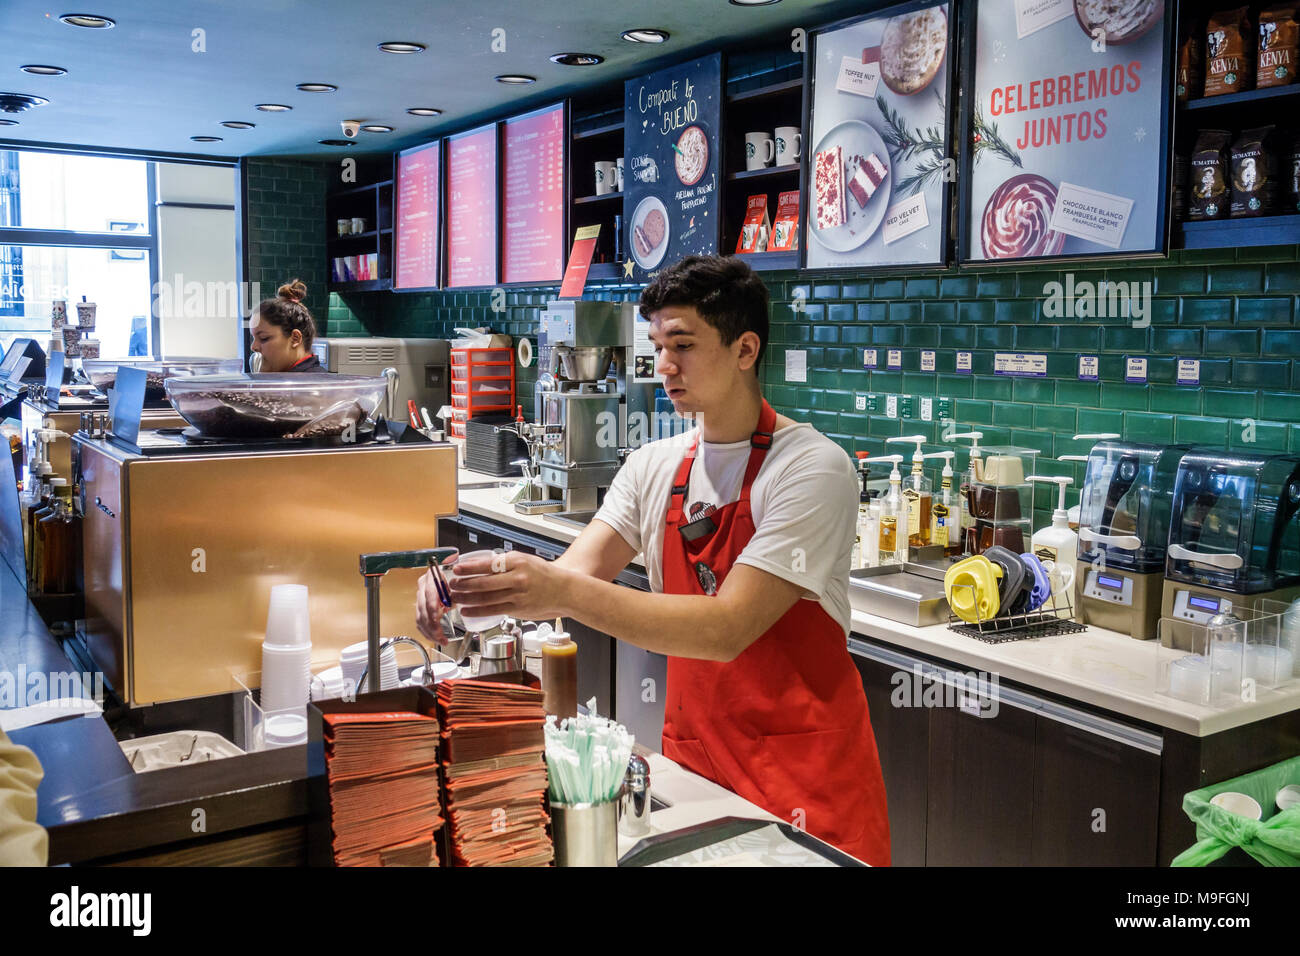 Buenos Aires Argentina,Starbucks Coffee,coffeehouse,man men male,young adult,barista,working,counter,interior inside,Hispanic,ARG171128252 Stock Photo